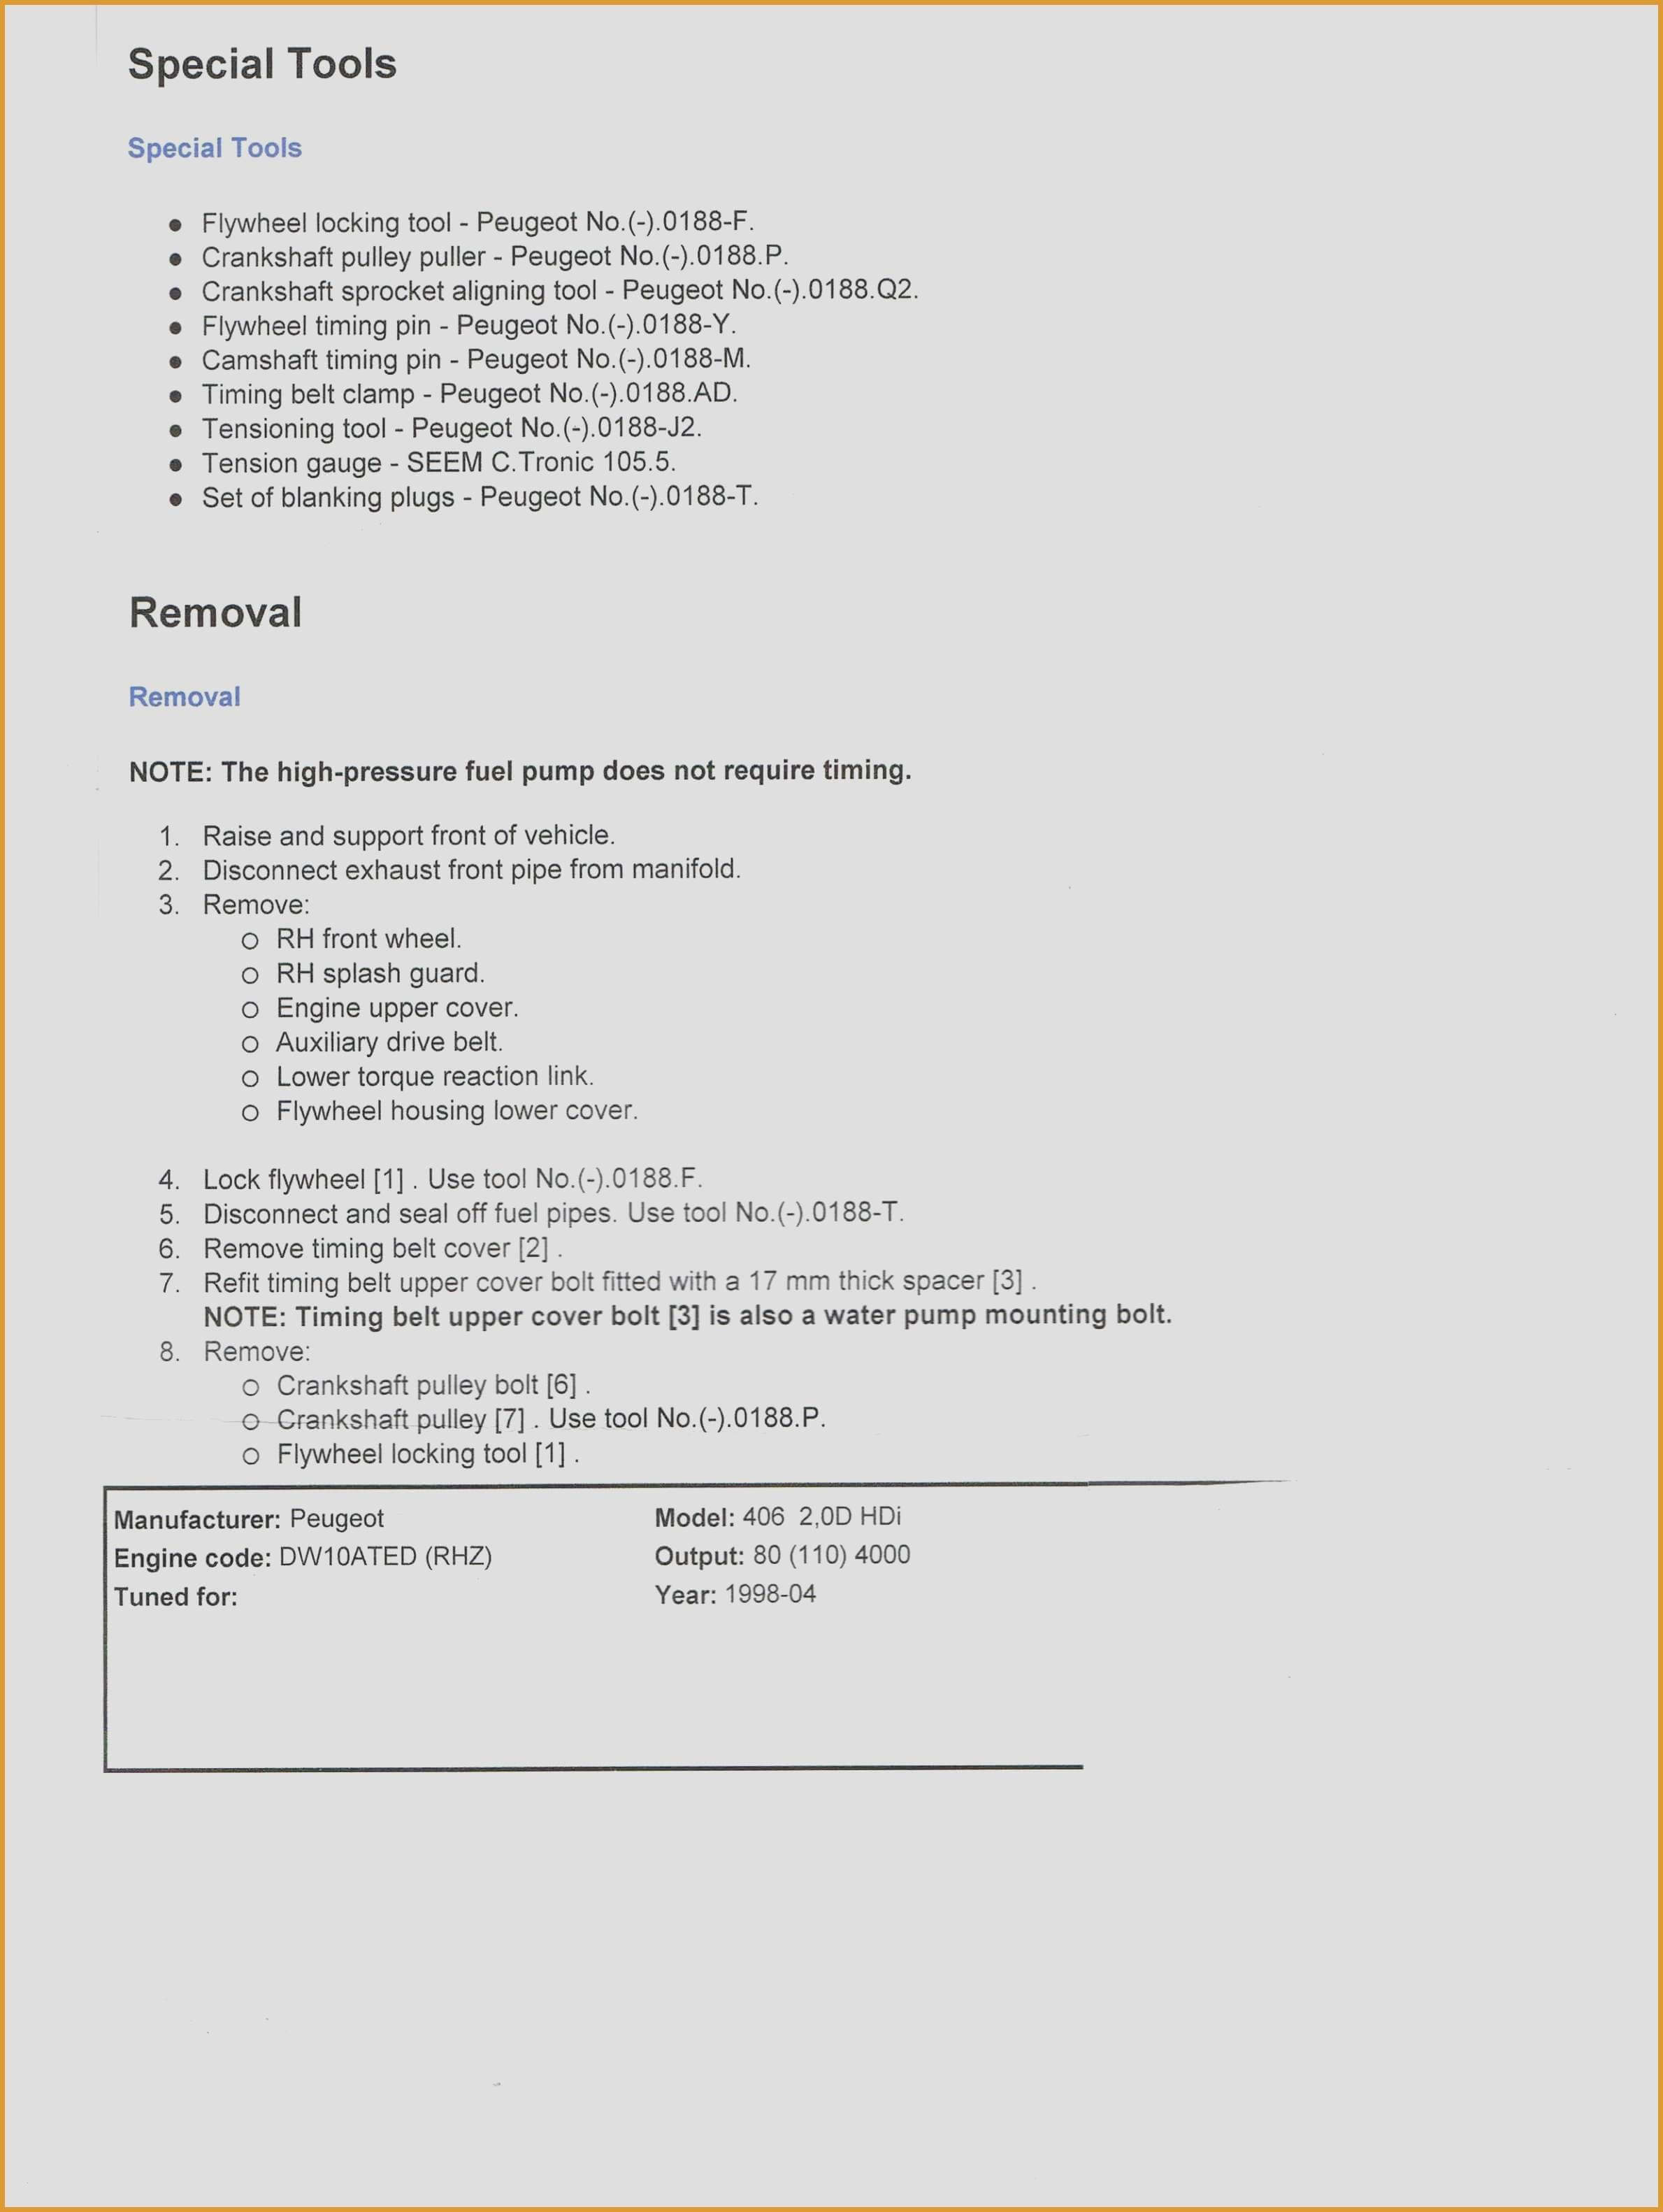 89 Simple Resume Template Microsoft Word | Jscribes Intended For How To Find A Resume Template On Word